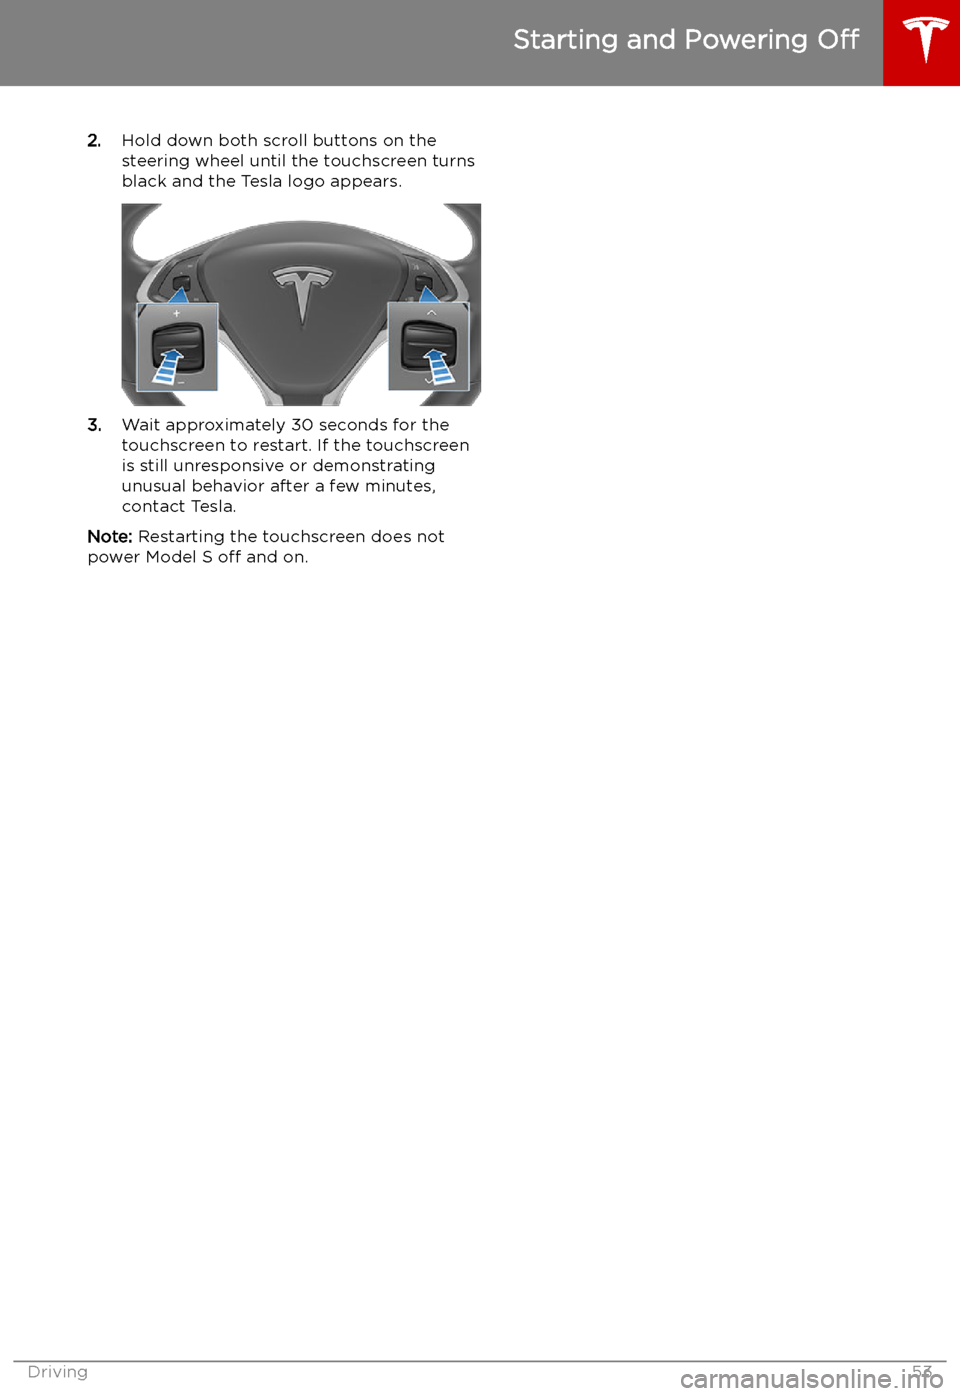 TESLA MODEL S 2019  Owners Manual 2.Hold down both scroll buttons on the
steering wheel until the touchscreen turns
black and the Tesla logo appears.
3. Wait approximately 30 seconds for the
touchscreen to restart. If the touchscreen
